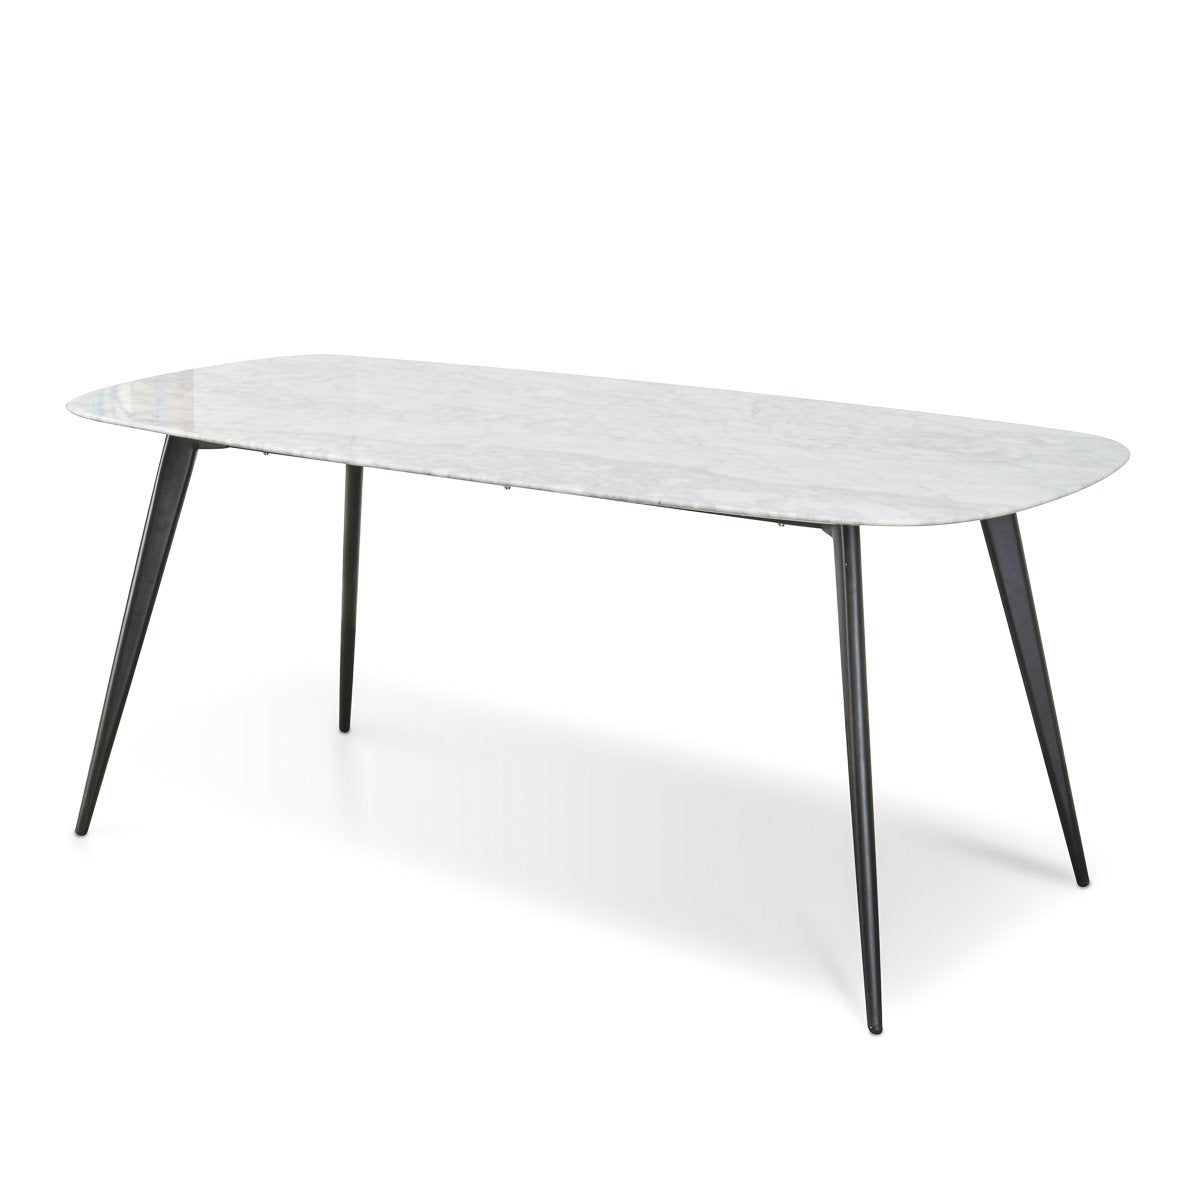 Nora White 1.8m Marble Dining Table - Black Legs